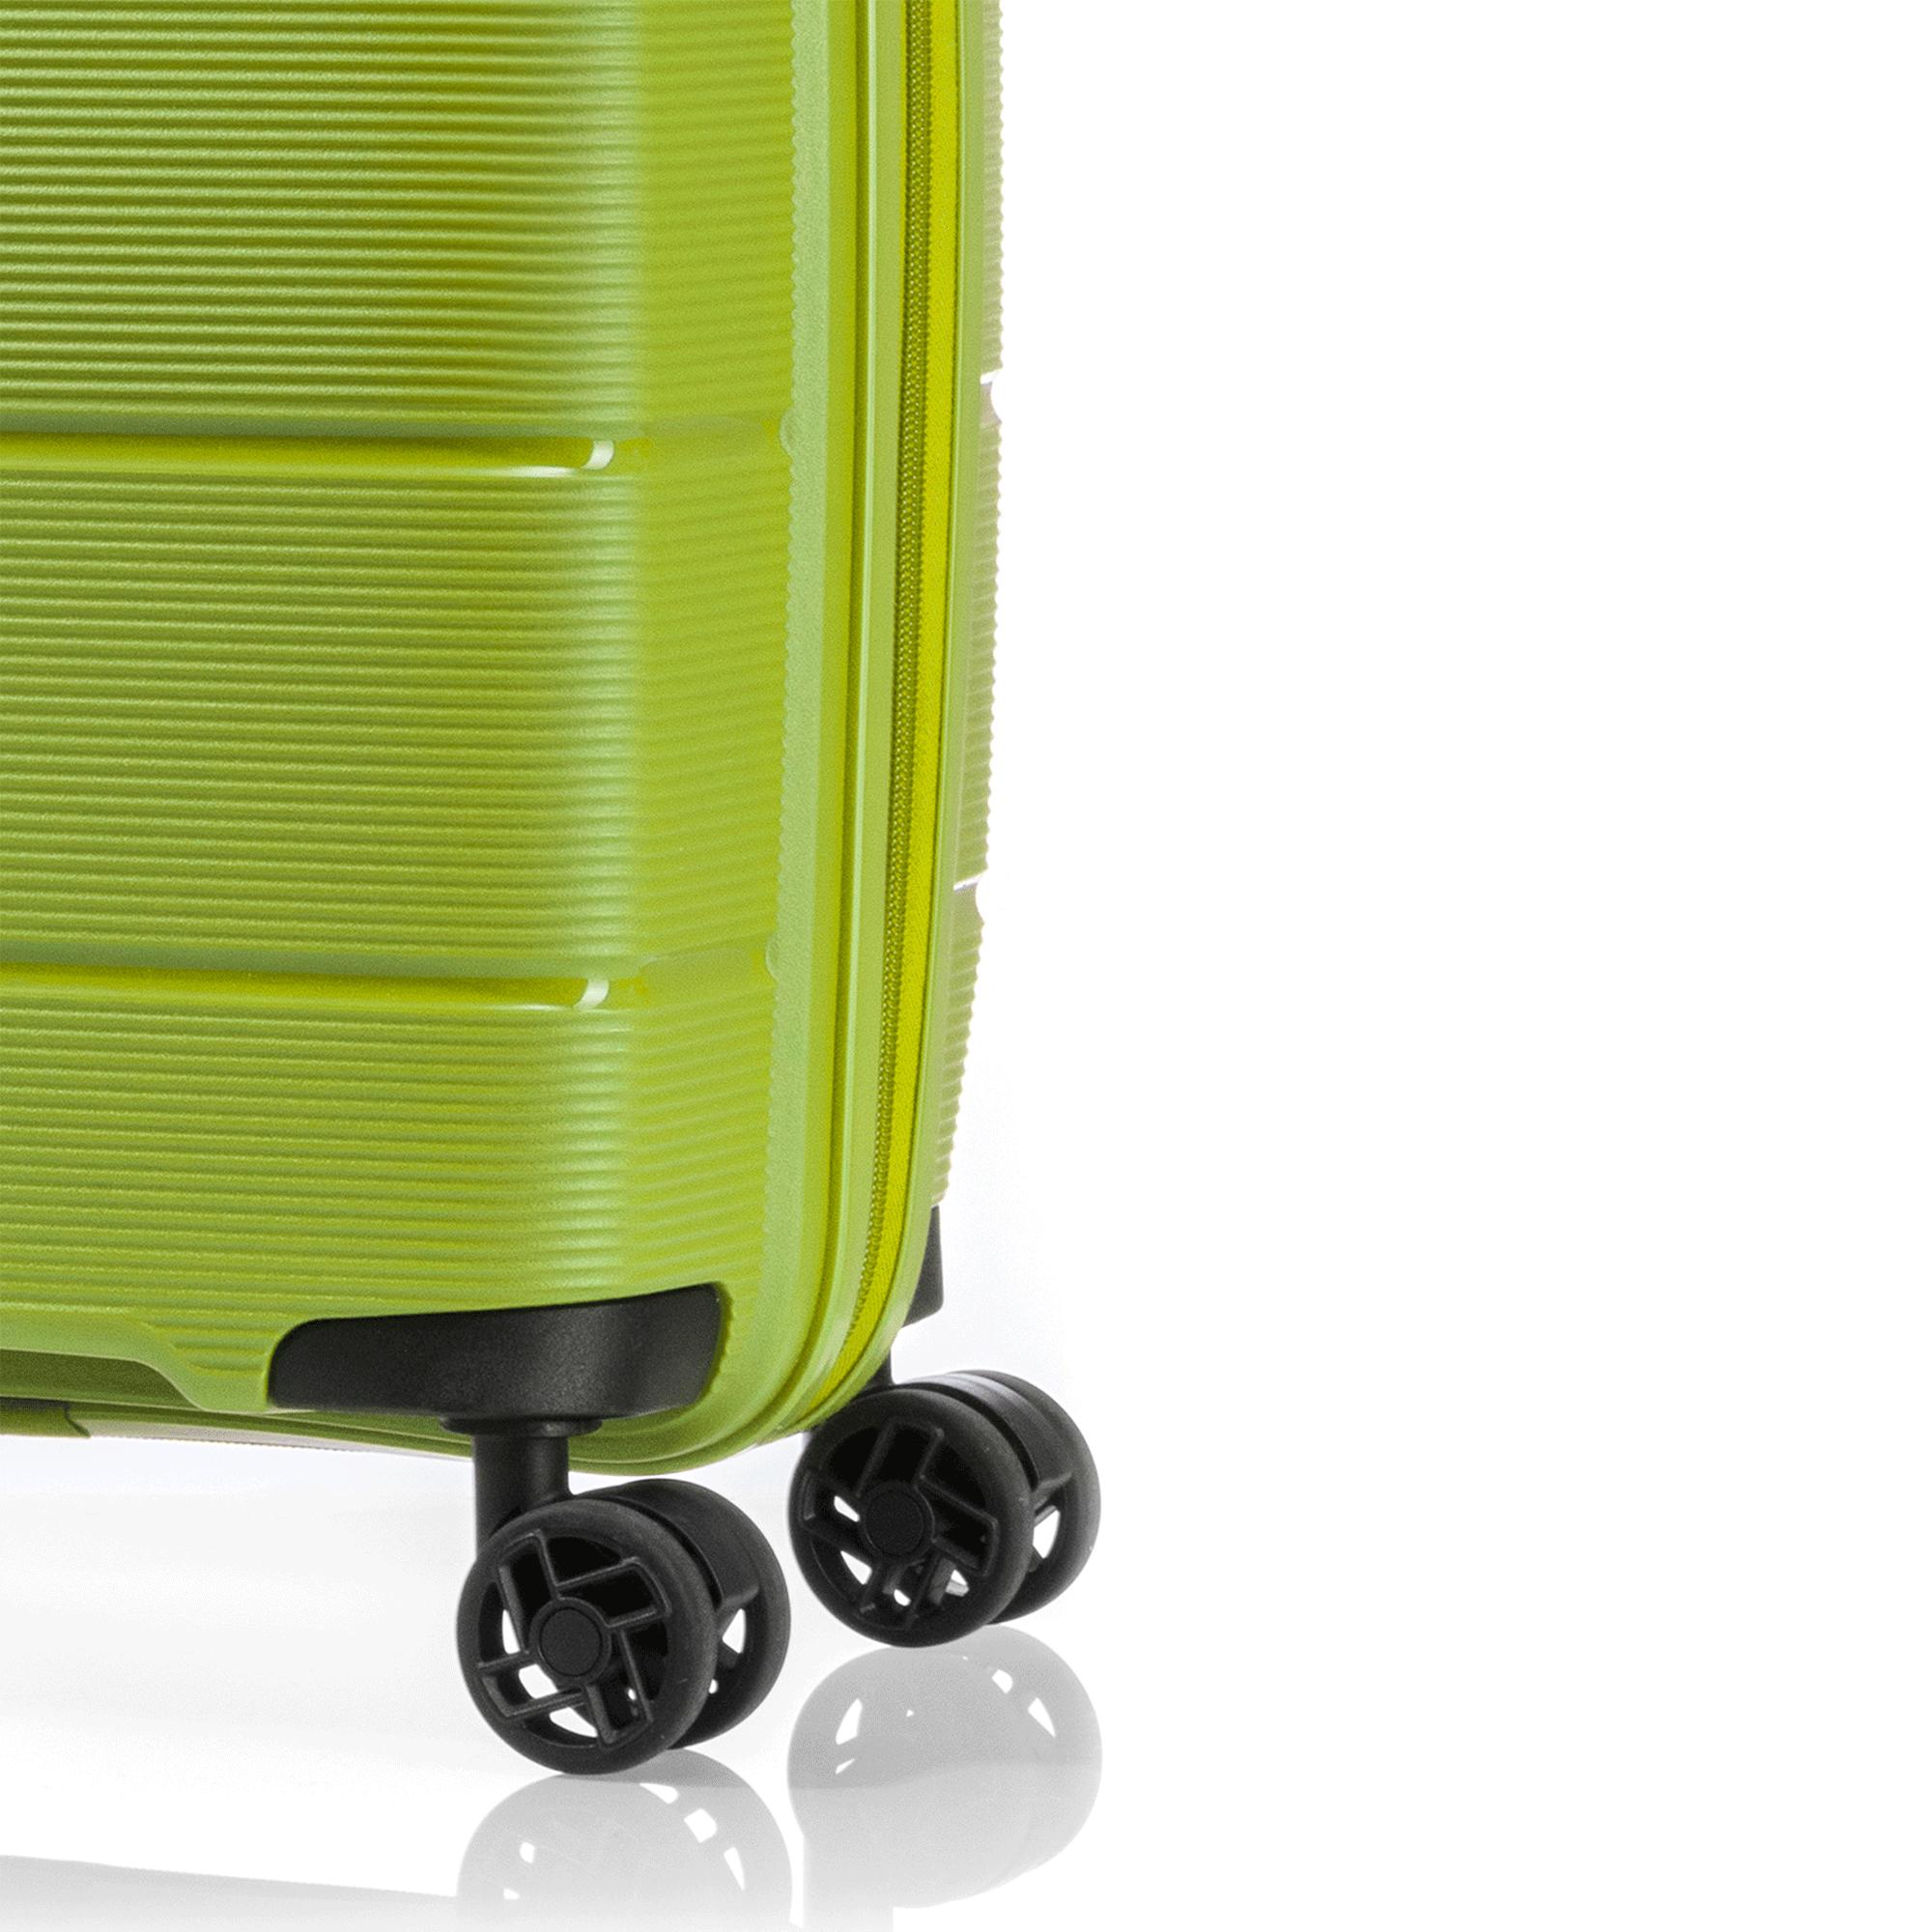 American Tourister Linex Spinner - Medium (66/24) Tsa (Lime) review and ...